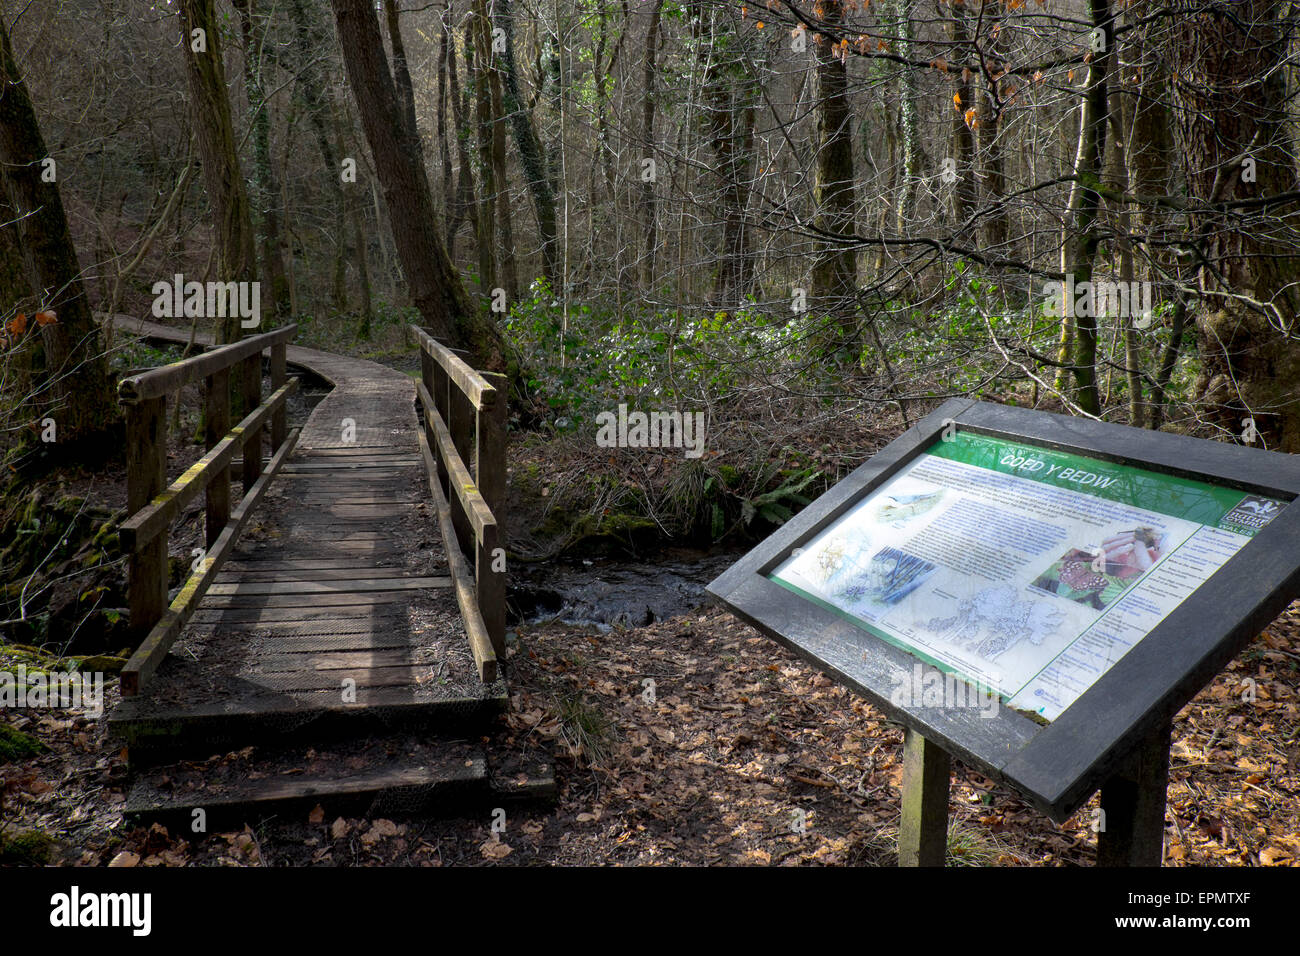 Information sign, Coed y Bedw nature reserve near Taff's Well, Cardiff, South Glamorgan South Wales, UK Stock Photo